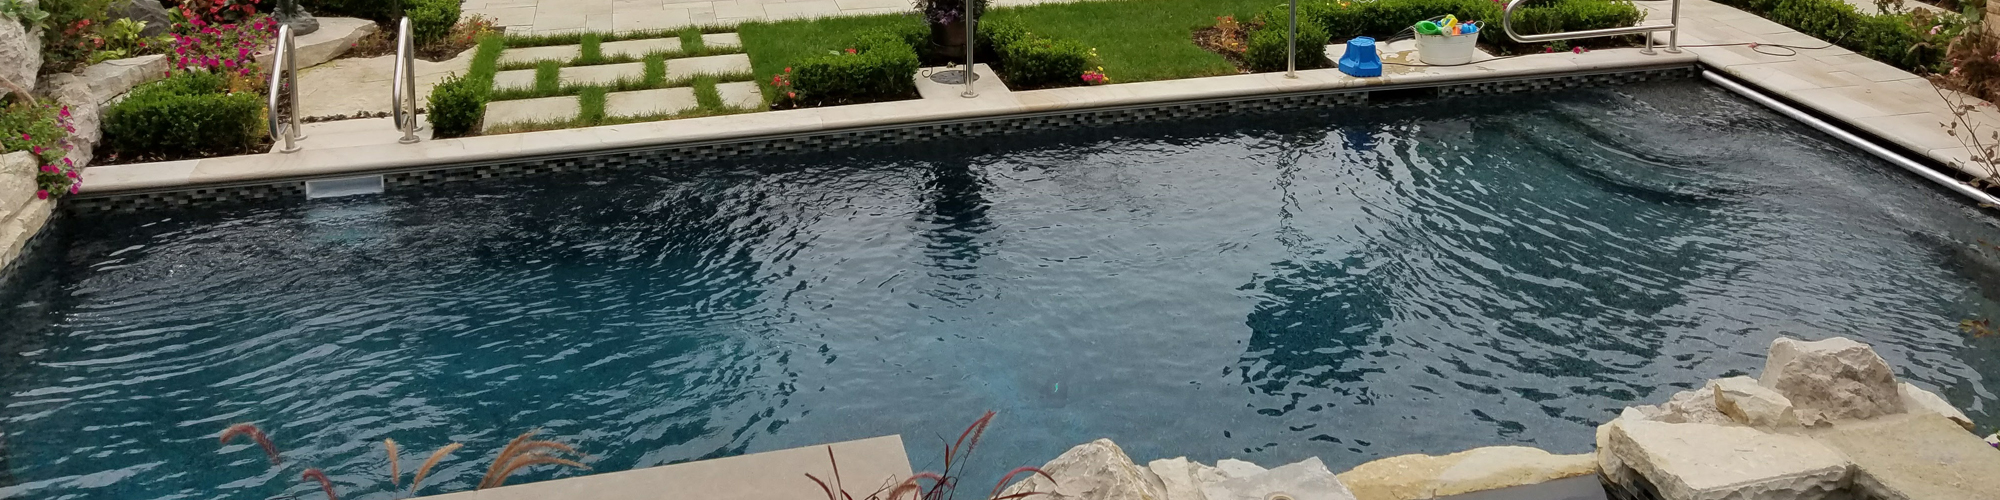 Turn To Us for High-Quality Pool Surfacing Materials in Milwaukee, WI